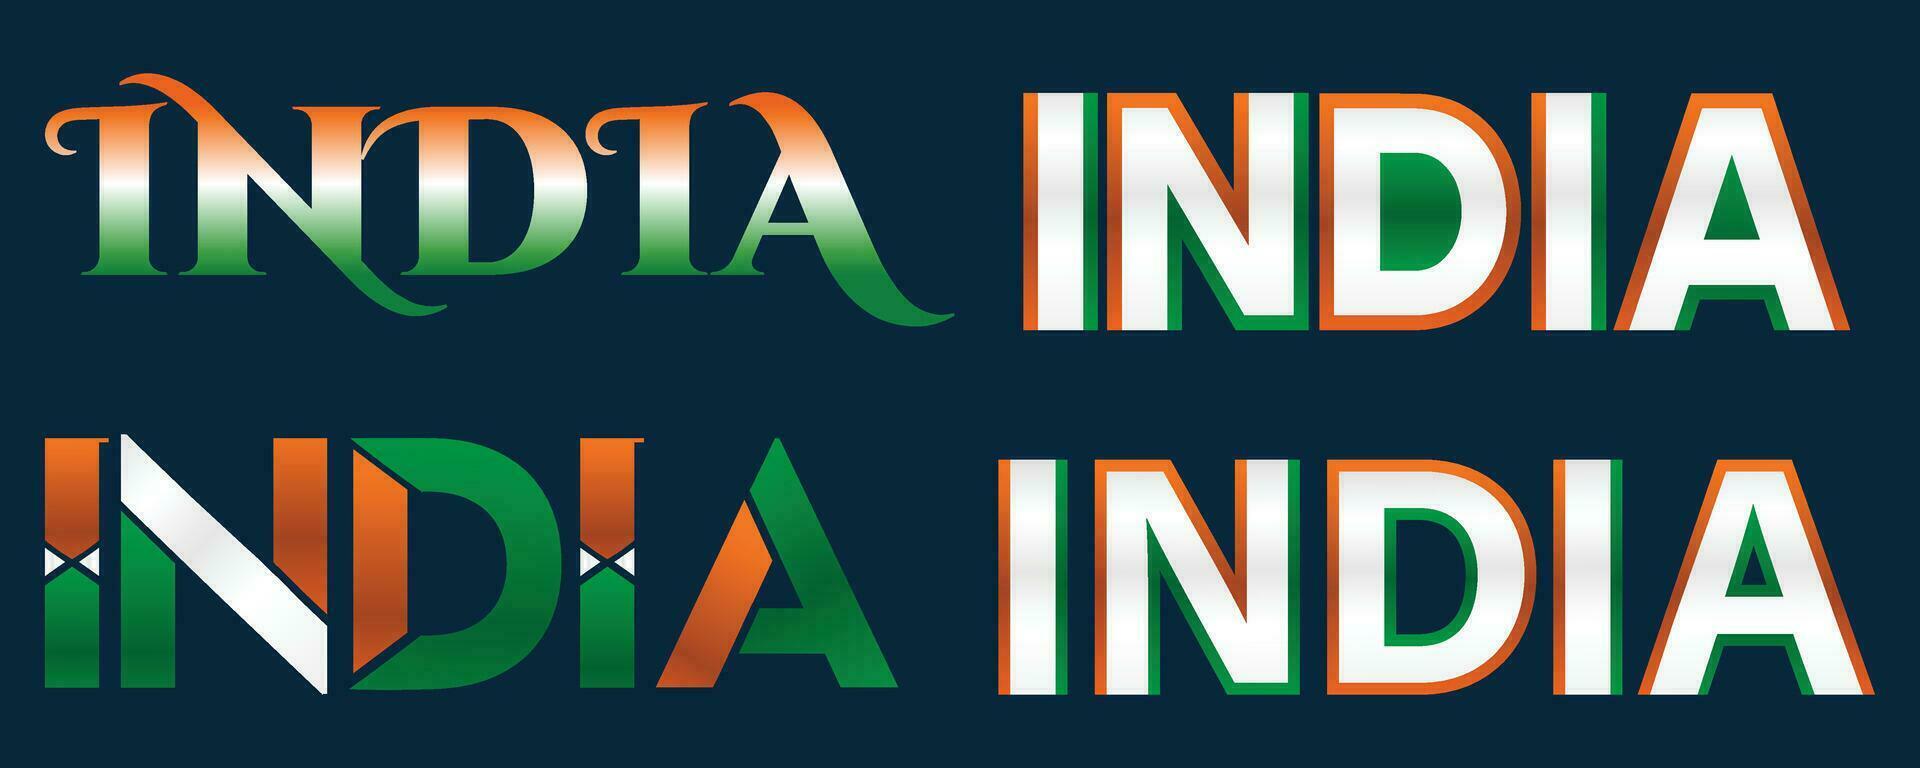 India text style effect, 26 January, republic day, Indian Independence Day theme, Vector, Indian flag background, vector